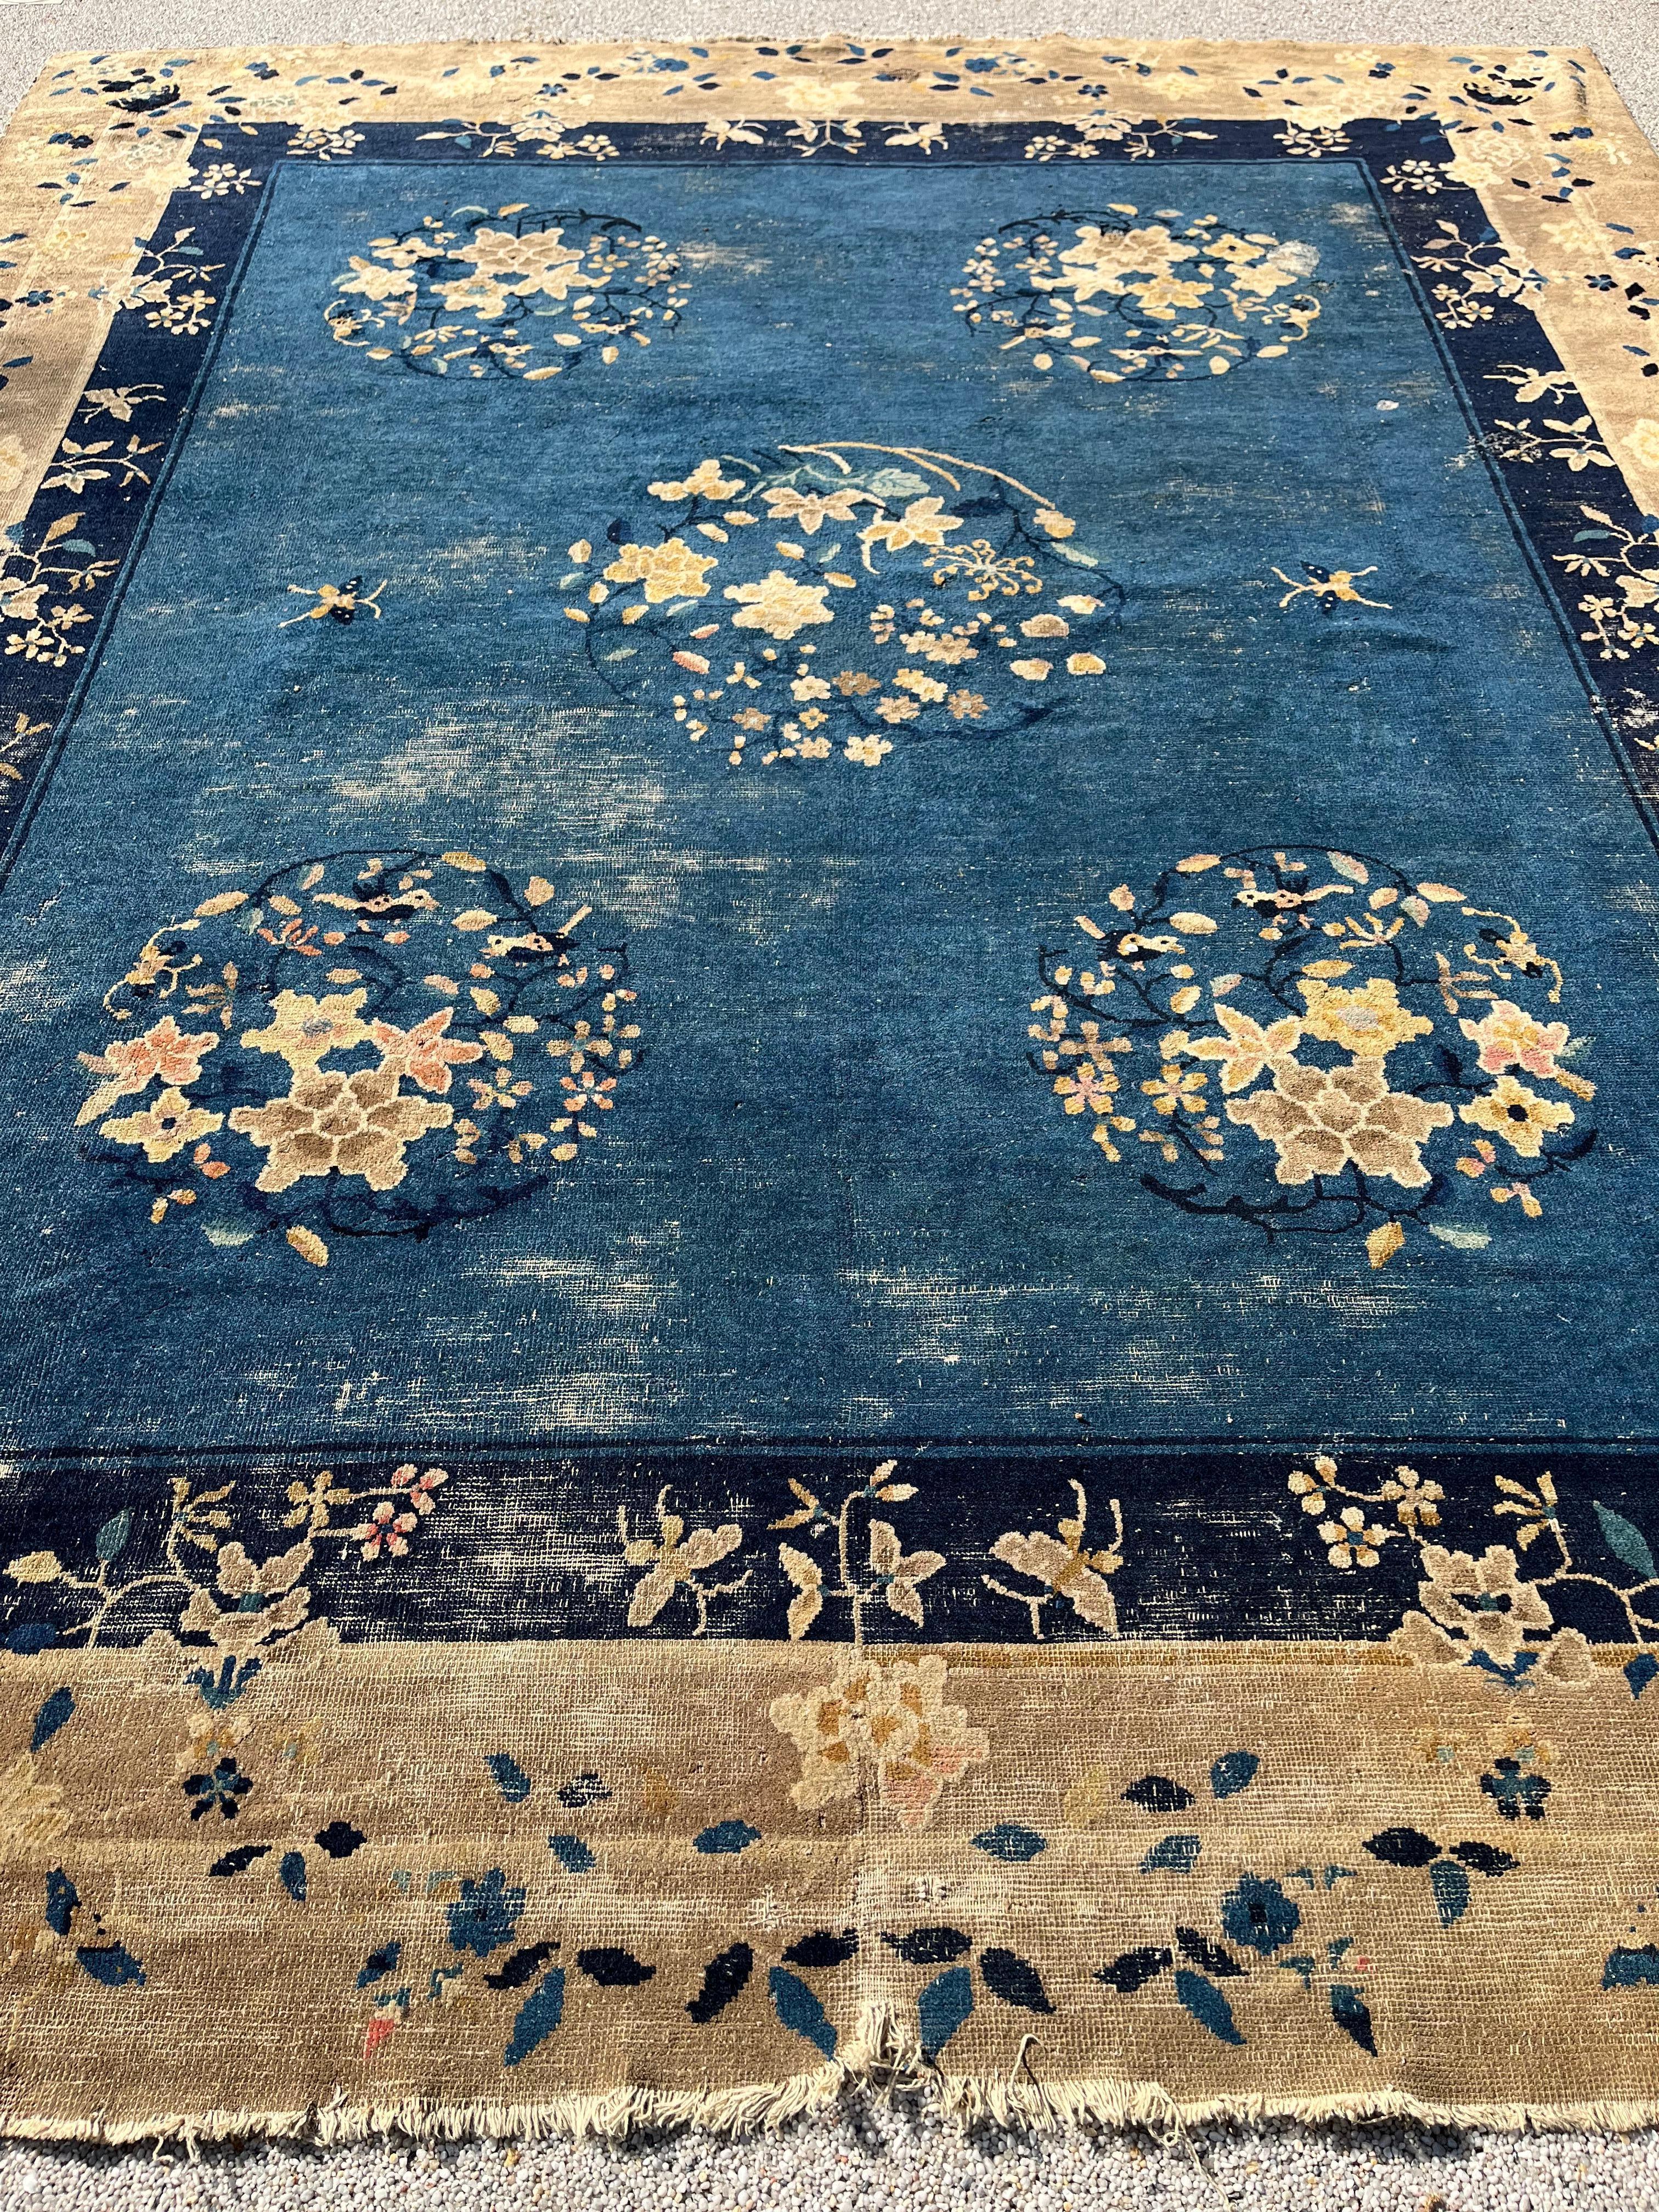 Wool Beijing Chinese Art Deco Rug Circa 1900 For Sale